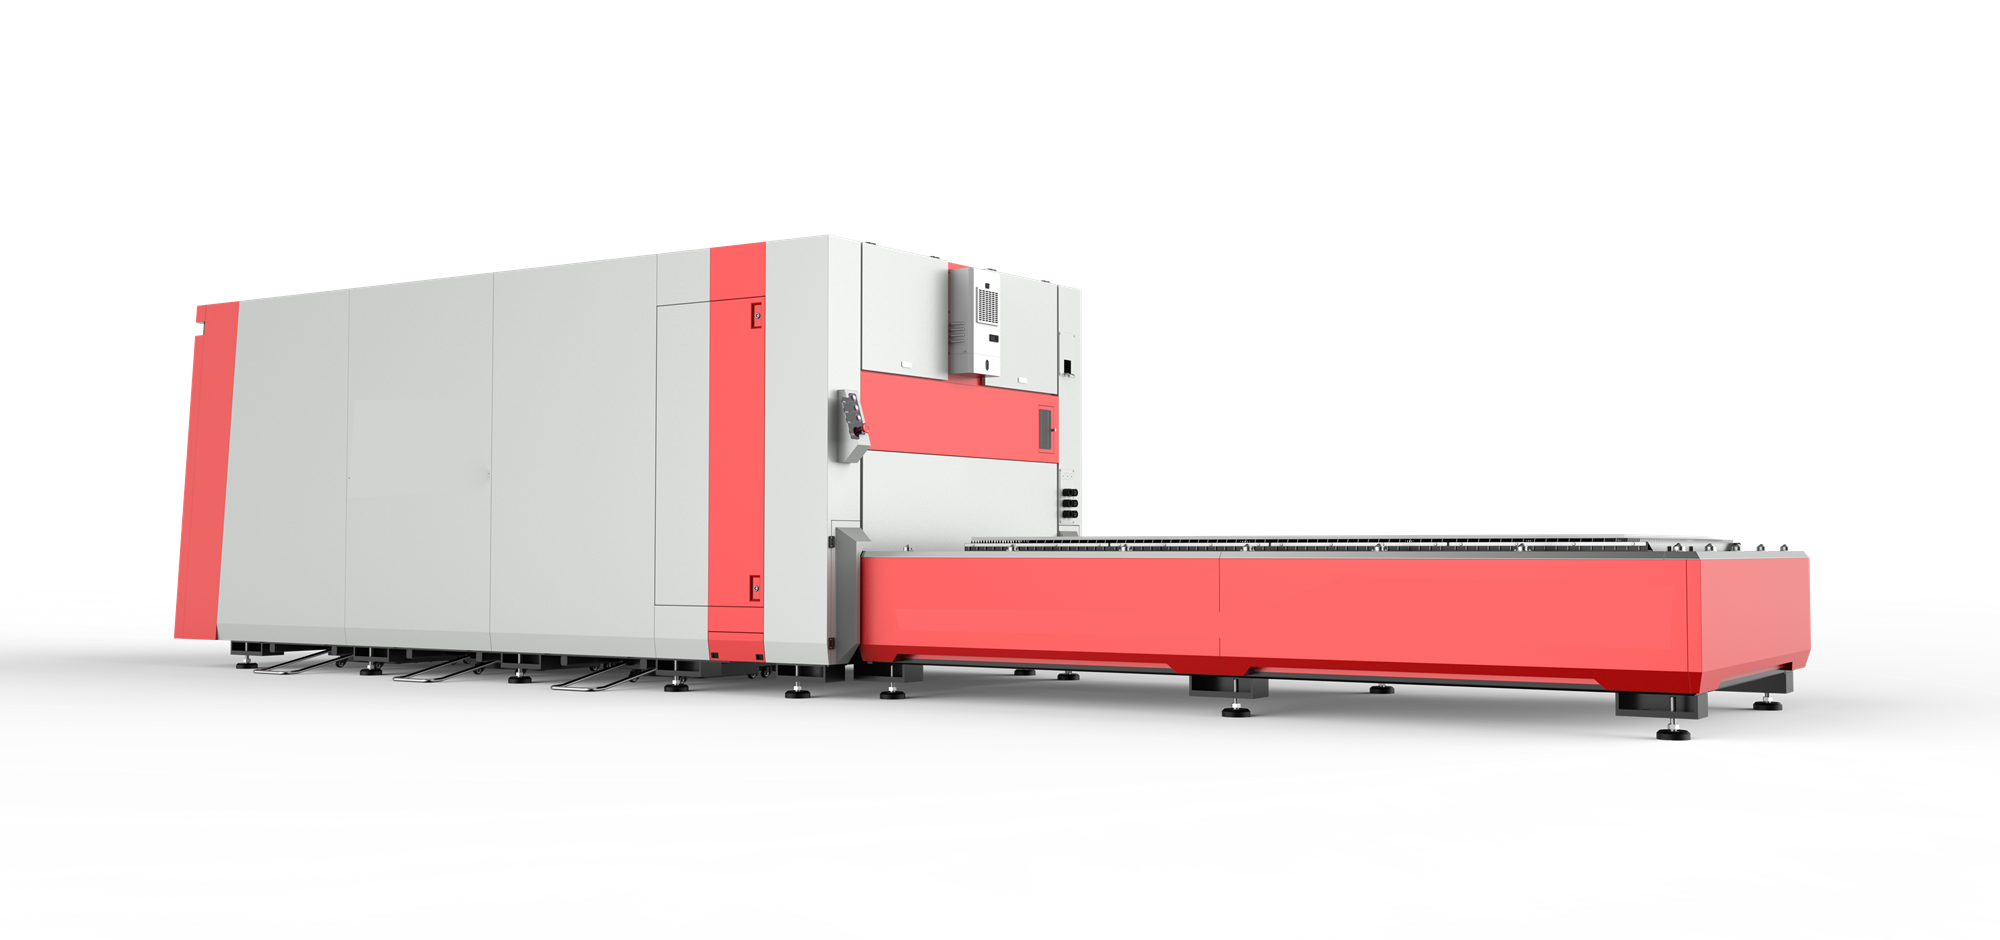 China CNC Manufacture  1530 2kw Full-cover Fiber Laser Cutting Machine for Stainless Steel Carbon Steel  in Stock Featured Image